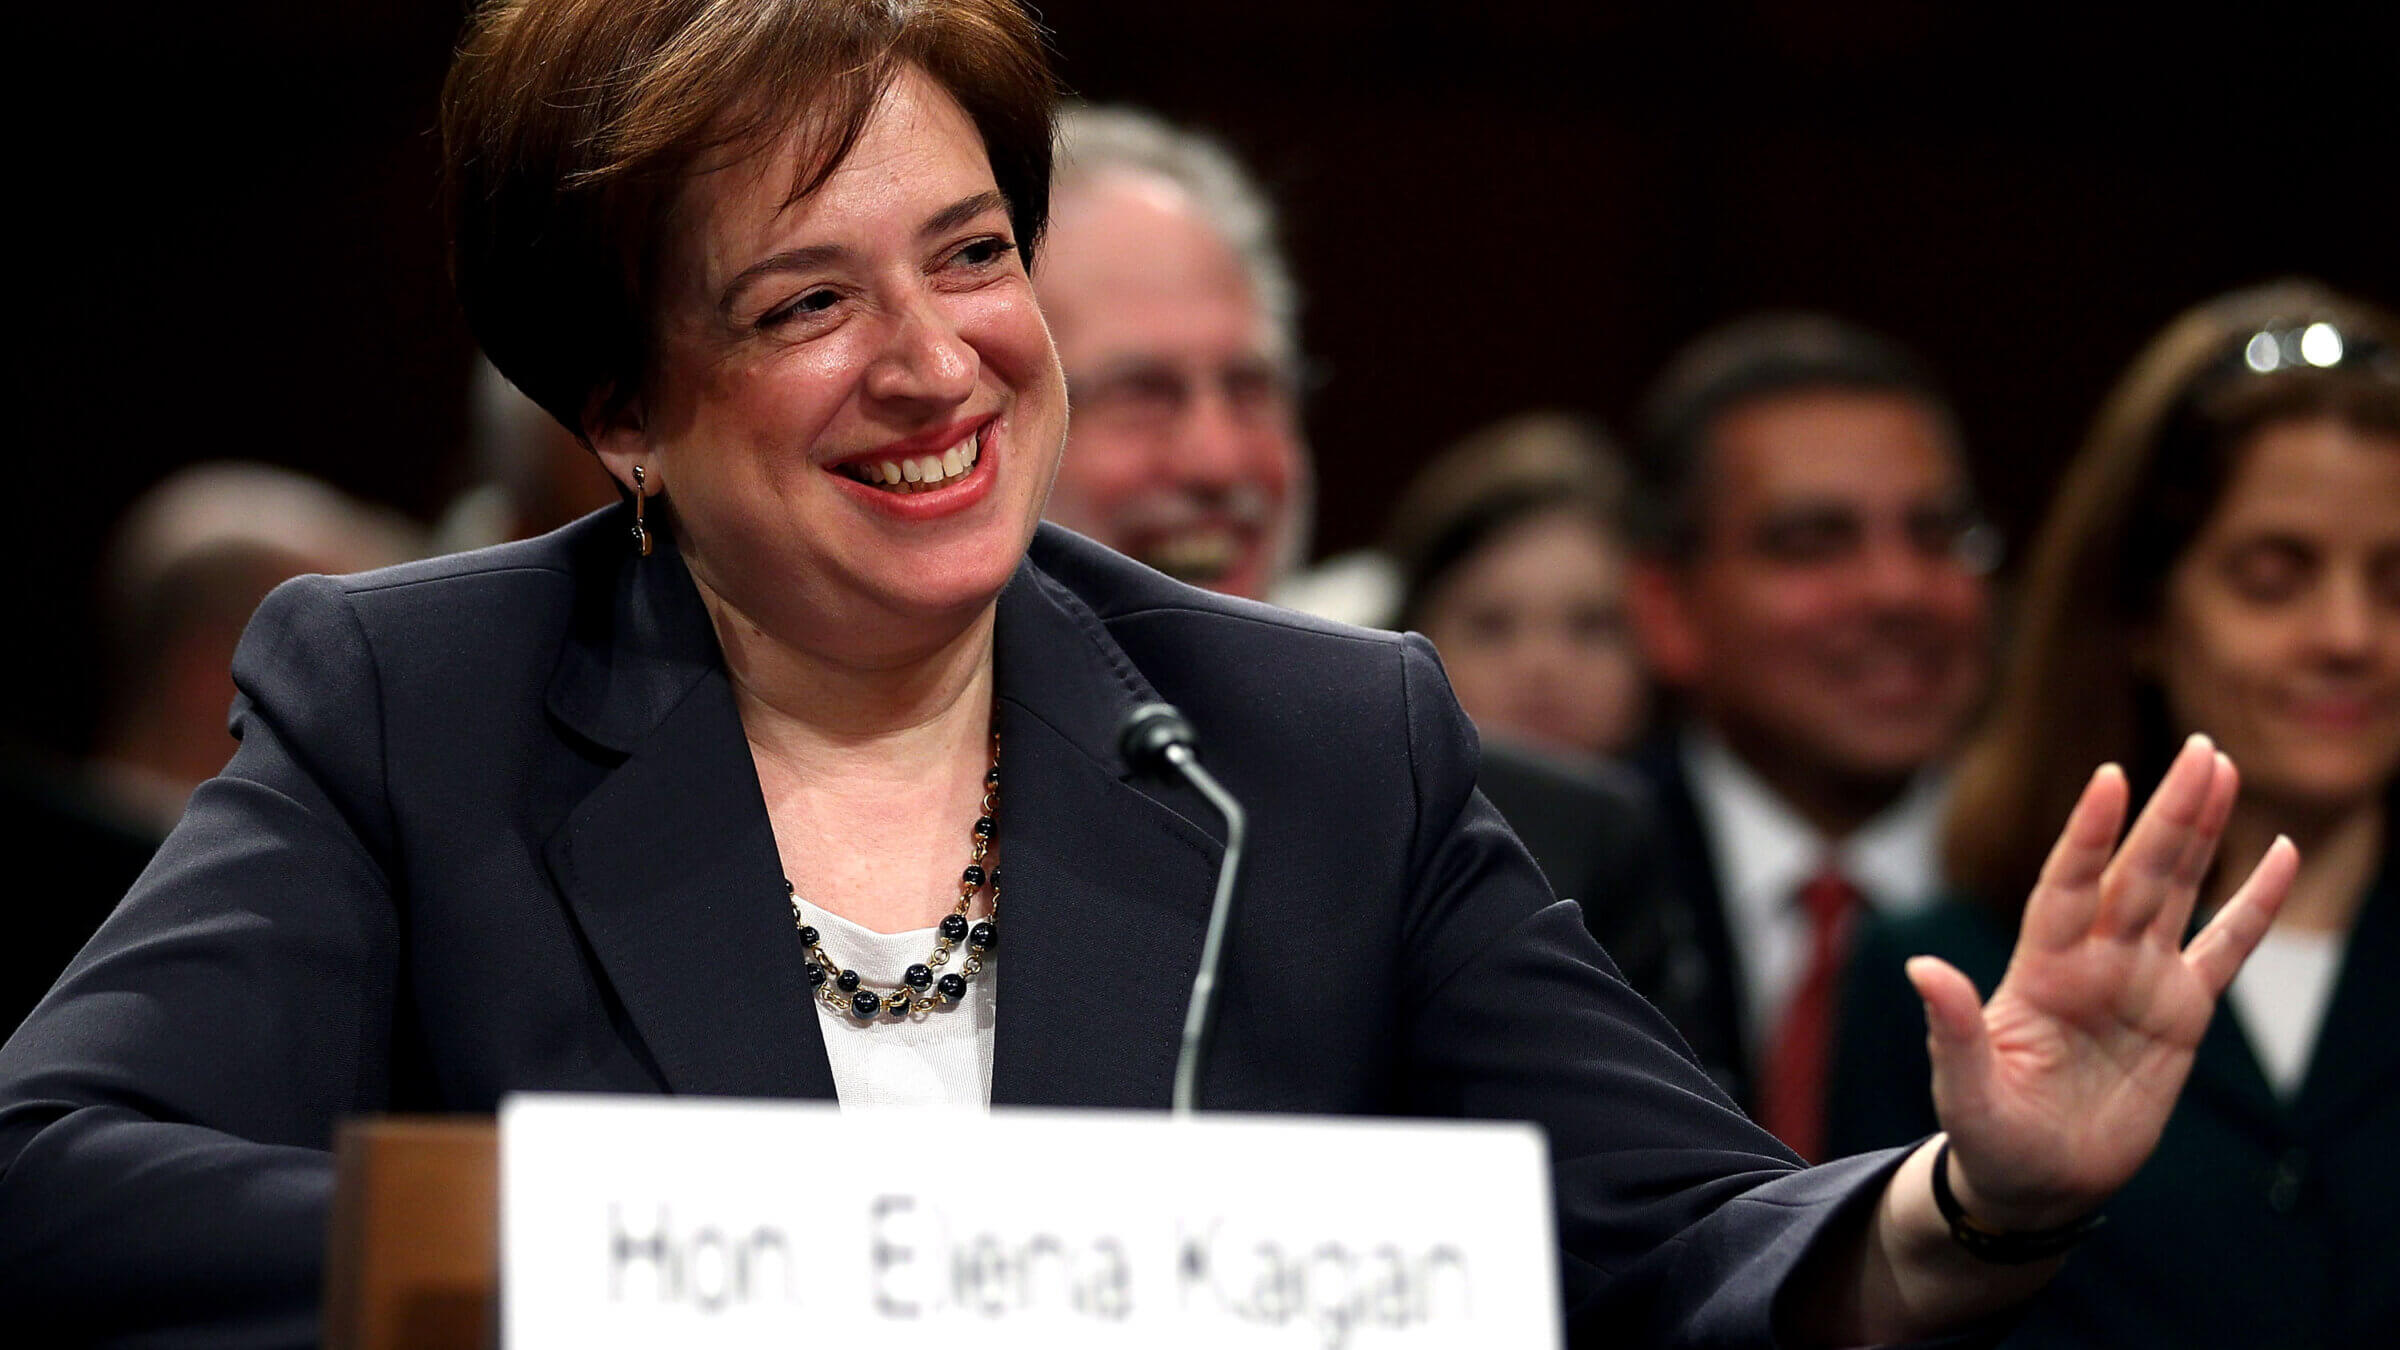 Elena Kagan at the 2010 Senate confirmation hearings for her nomination to the U.S. Supreme Court. 